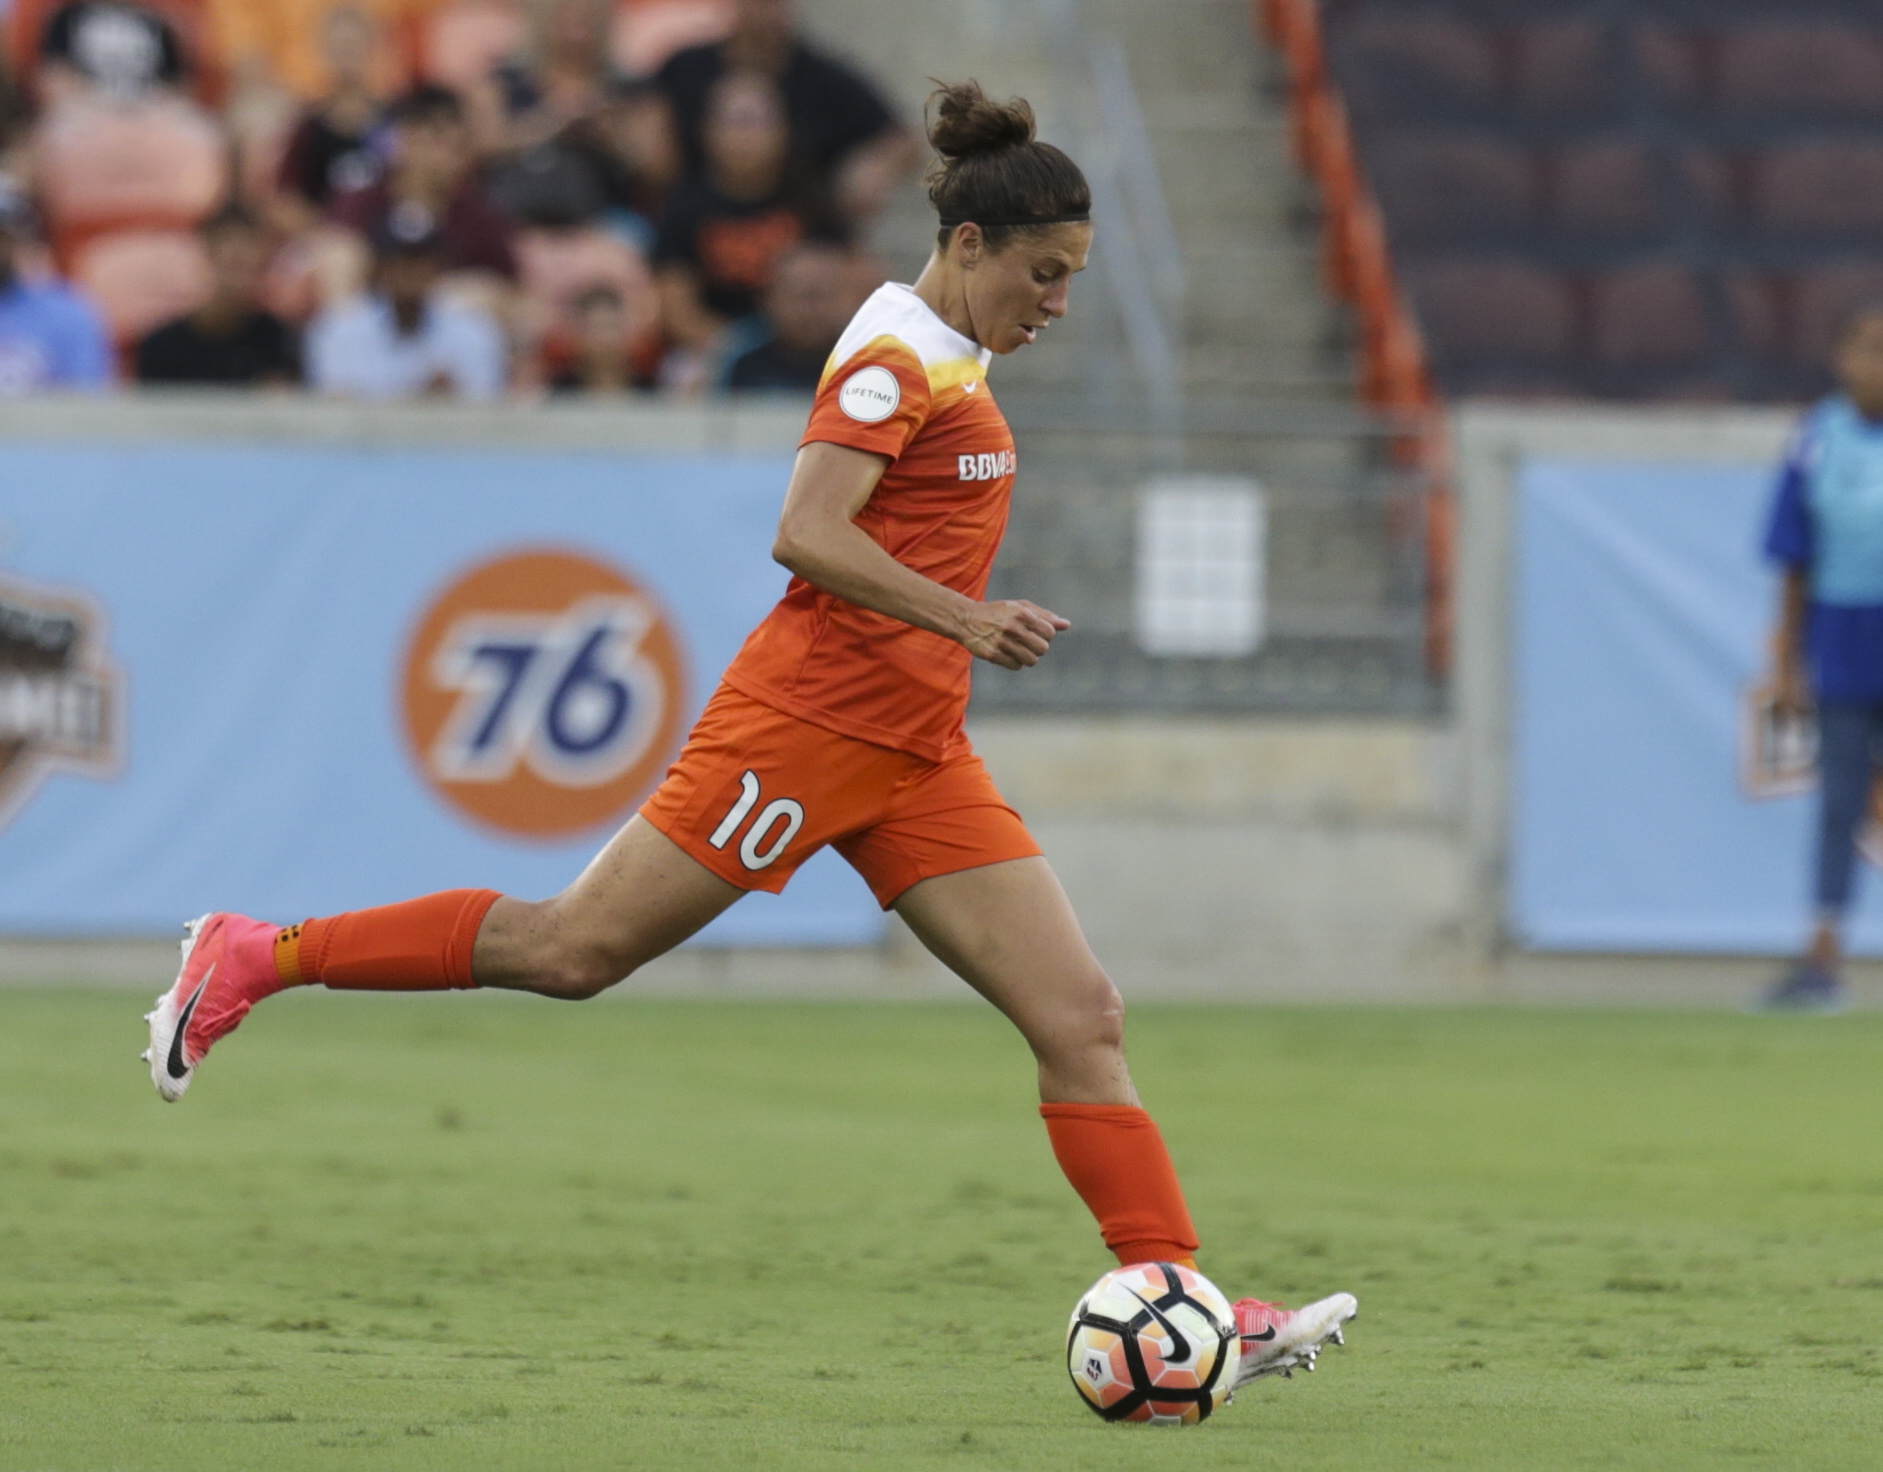 Dash hope to build momentum in home game against Boston